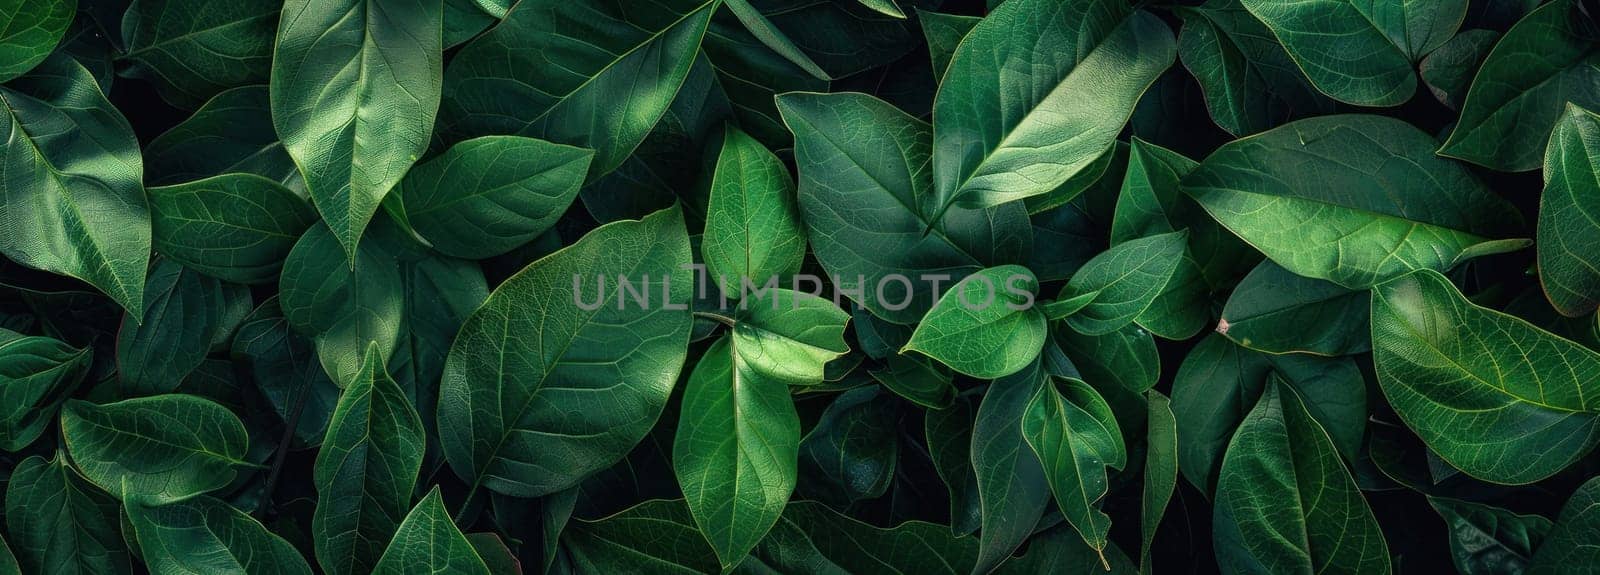 Green leaves in sunlight on black background close up view of nature and beauty with vibrant colors and contrast by Vichizh